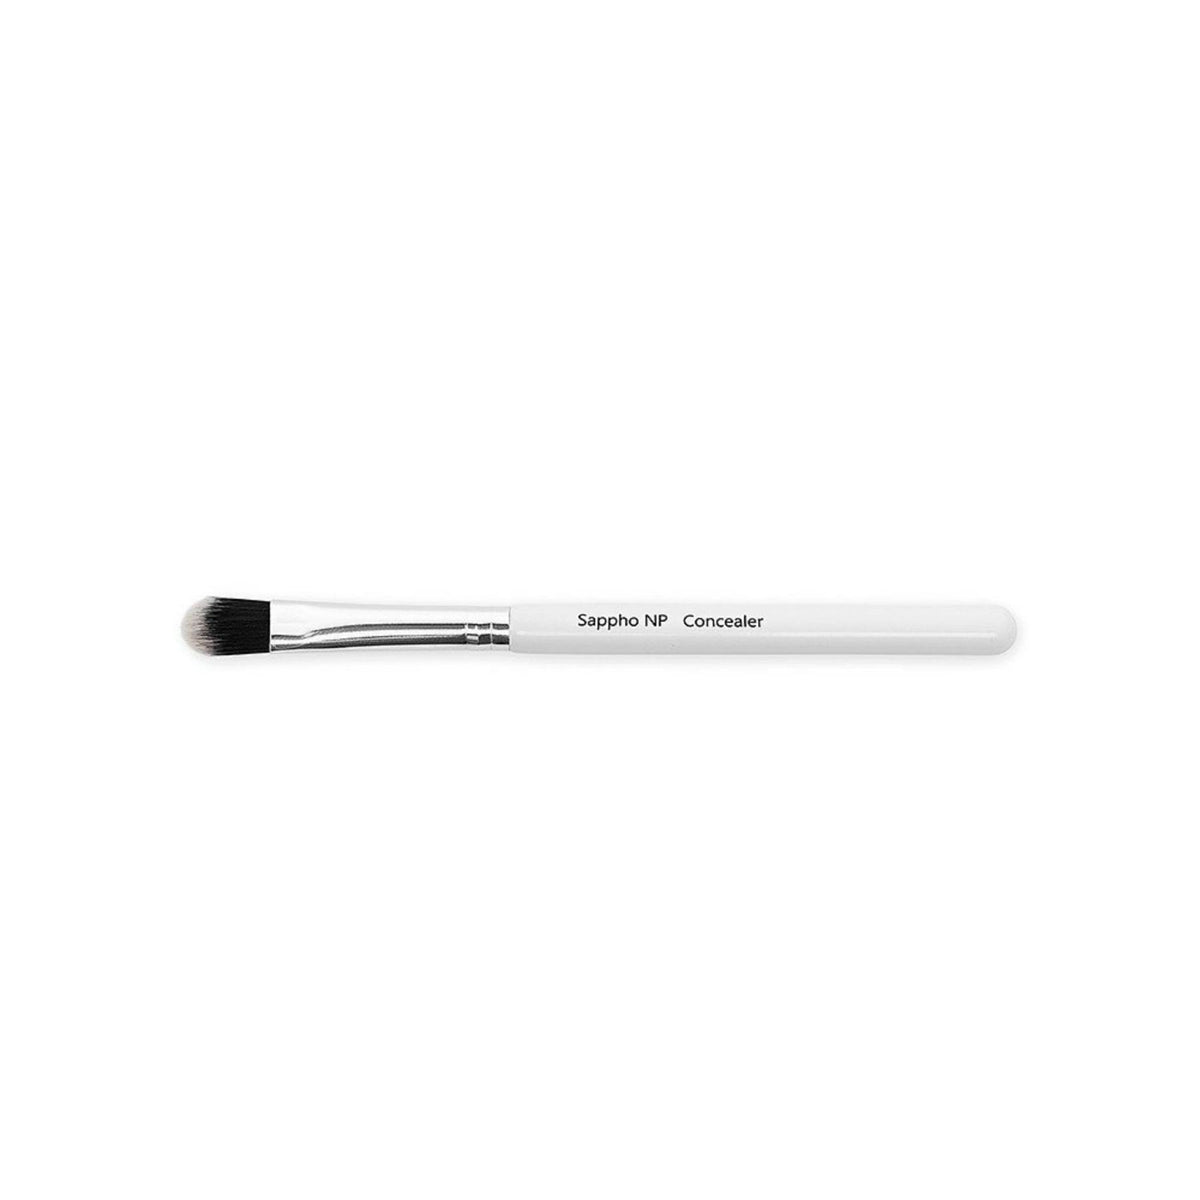 Cruelty Free Pro Makeup Brushes Pinsel Sappho New Paradigm Concealer Brush - Genuine Selection